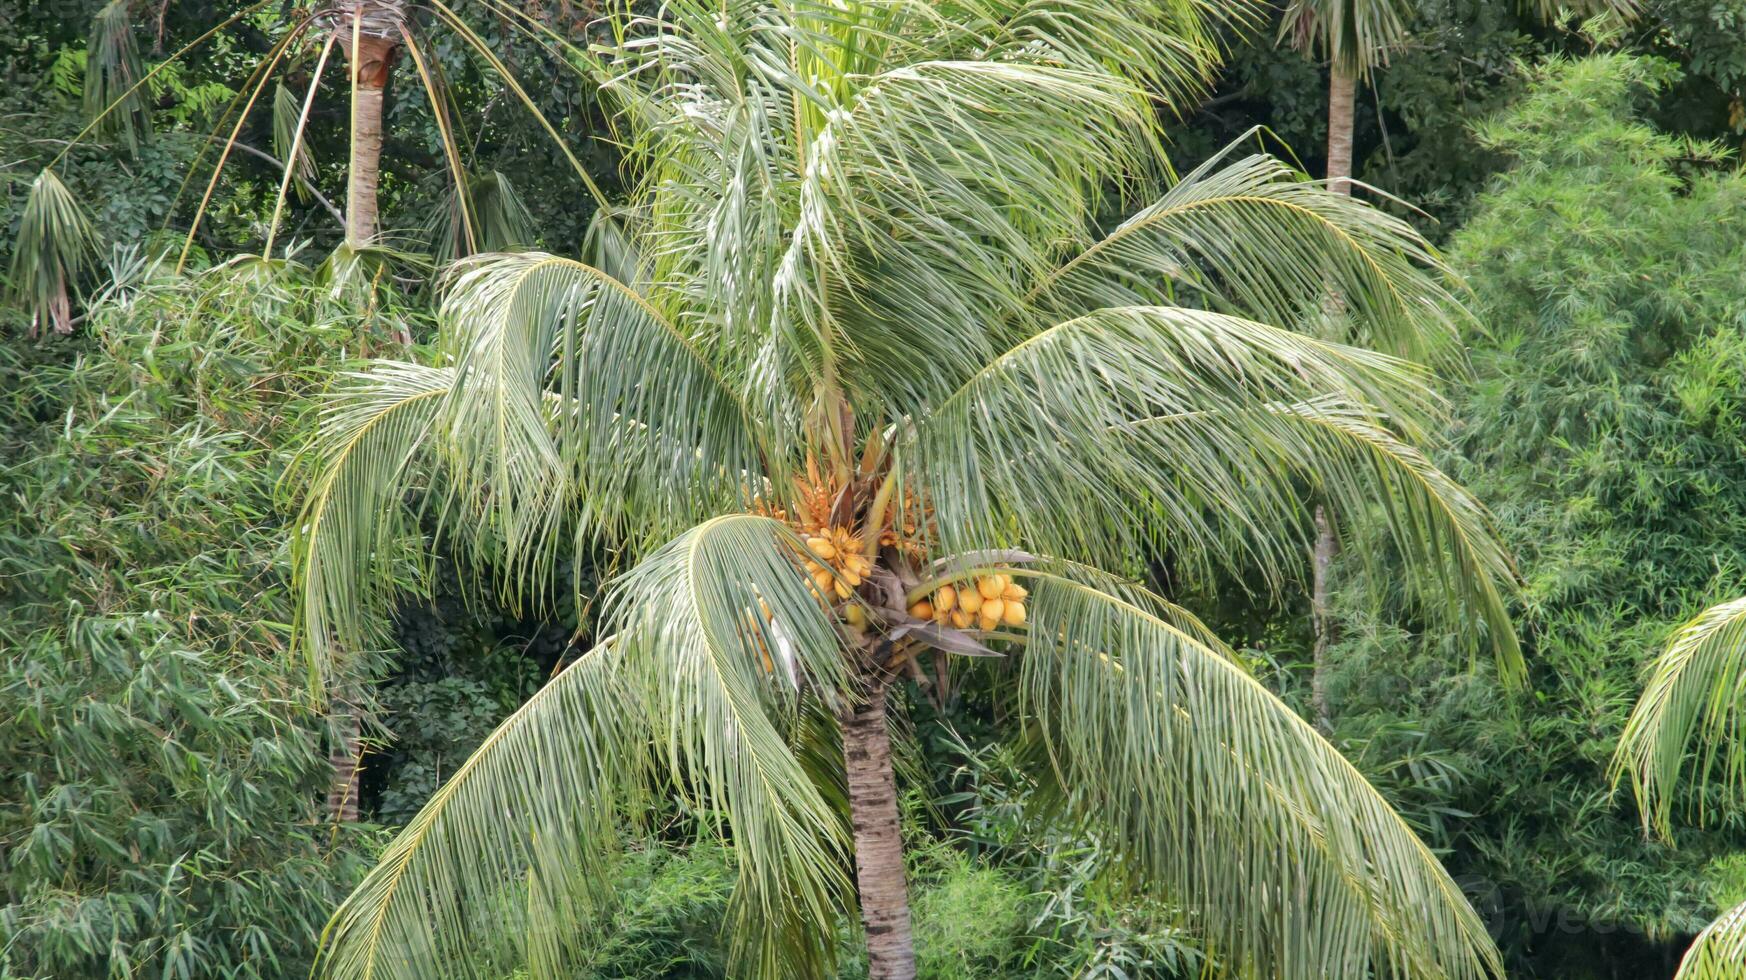 Coconut tree with yellow fruit and leaves blowing in the wind on a forest background. photo